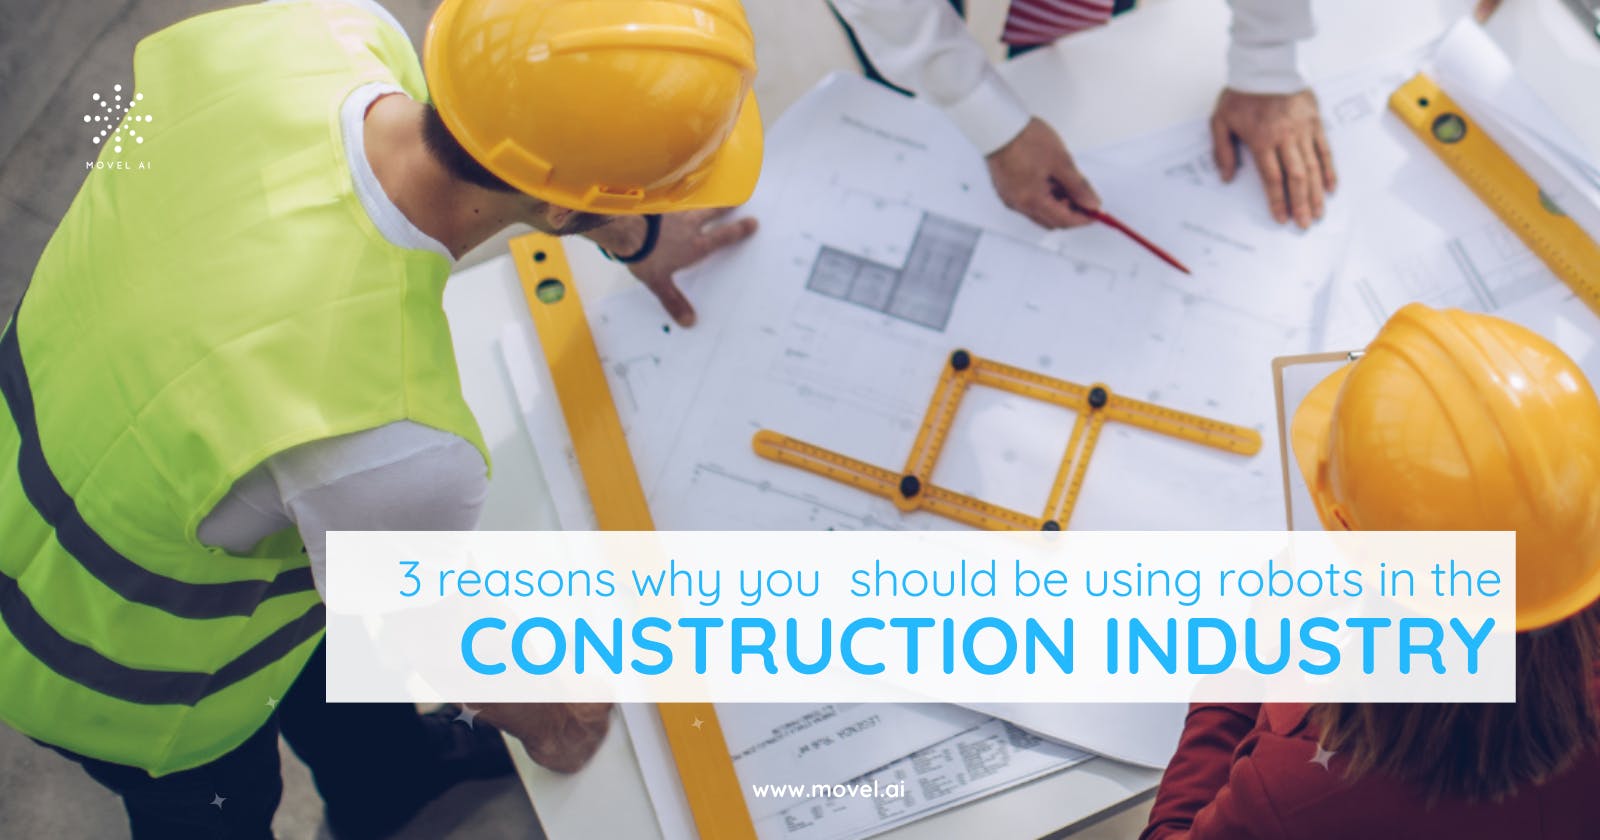 3 Reasons Why You Should be Using Robots in the Construction Industry